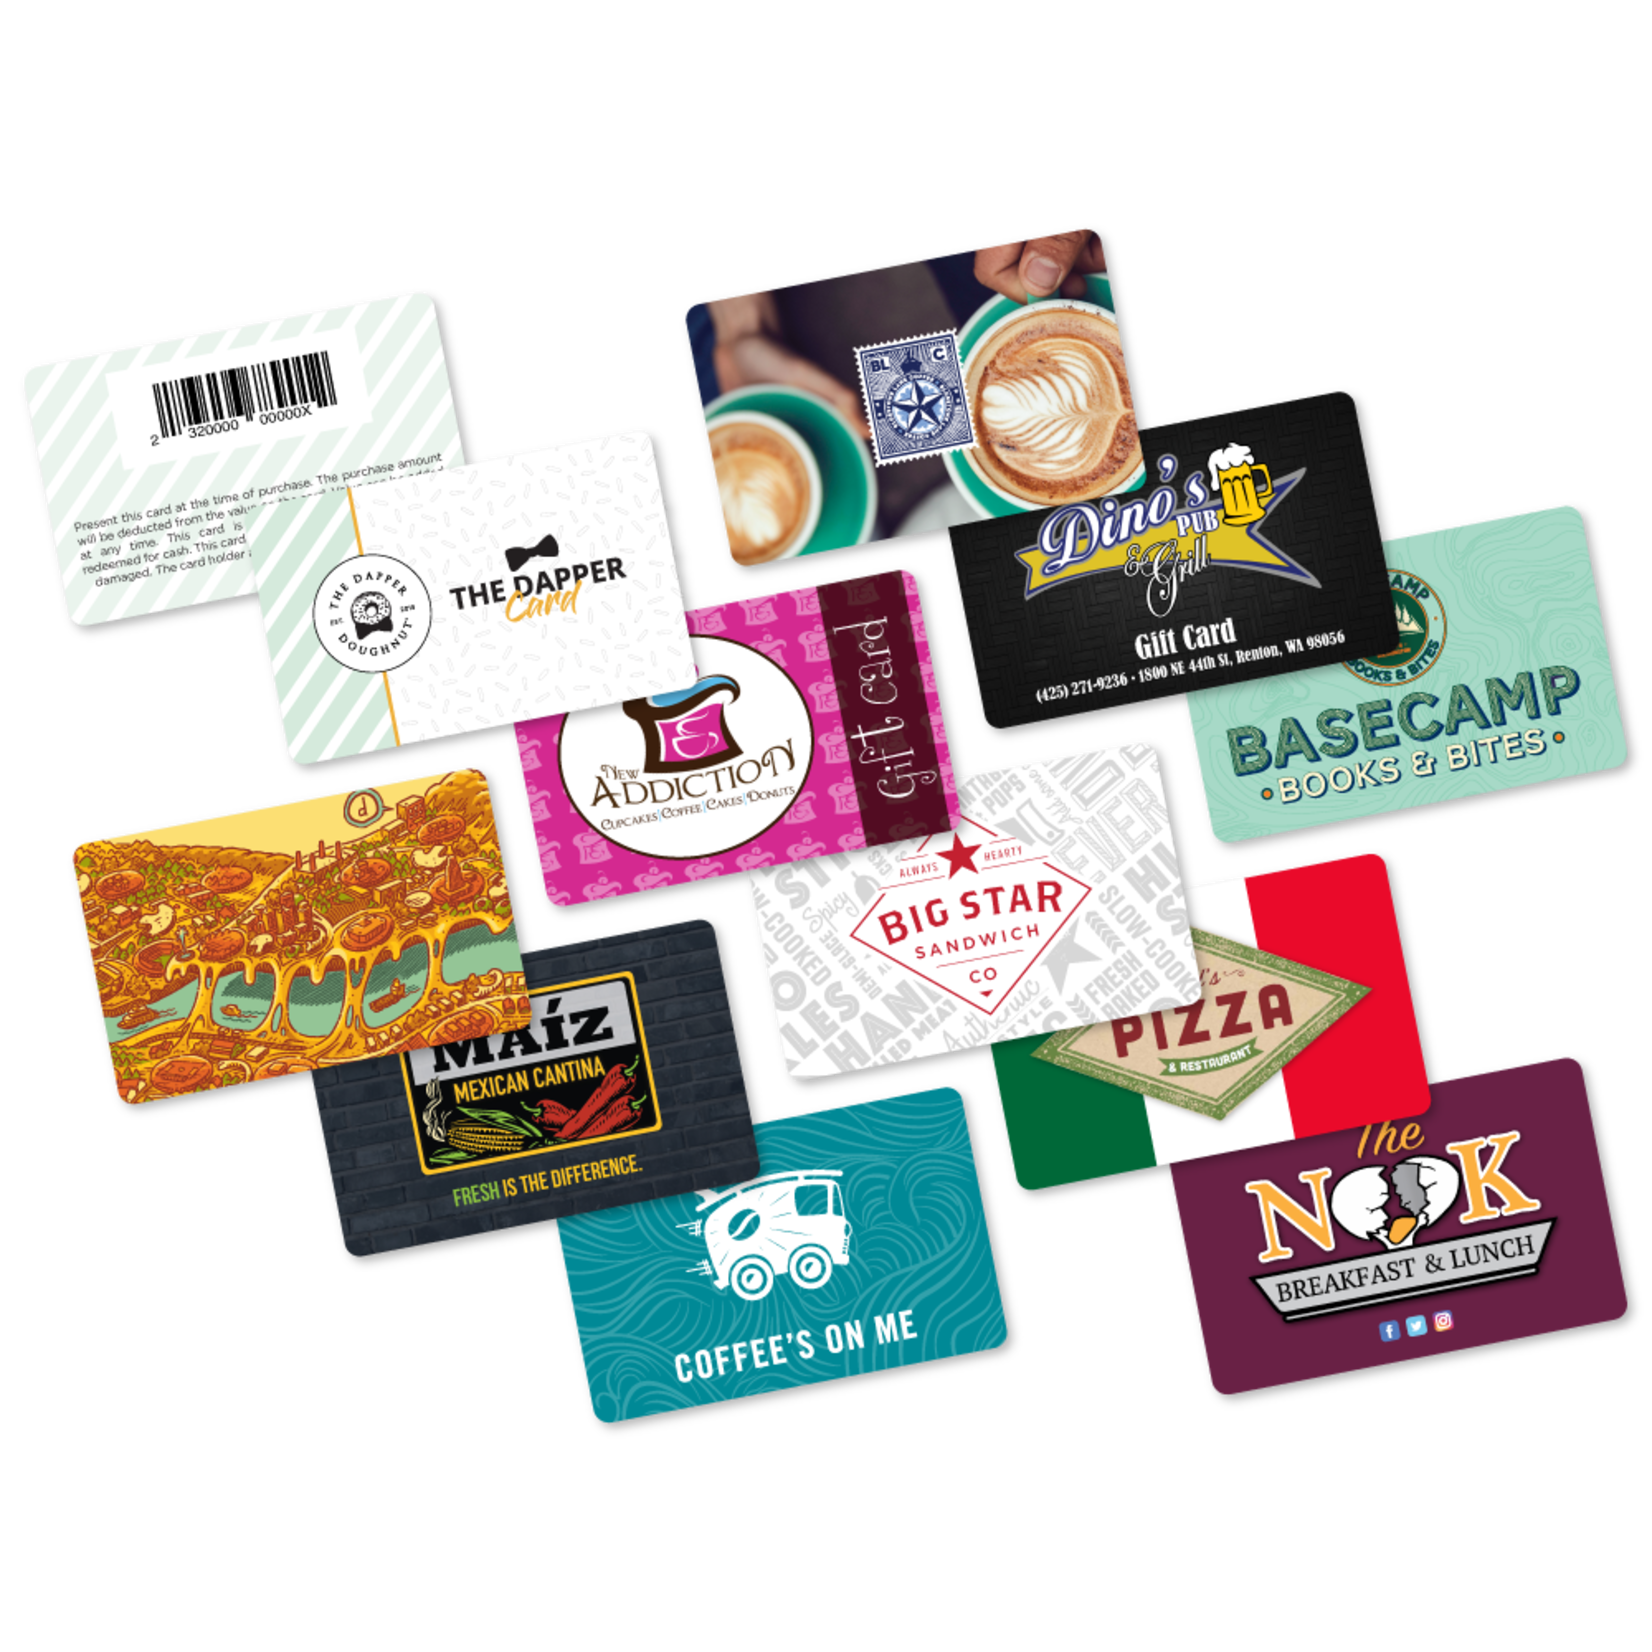 How To Make Custom Gift Cards For My Business